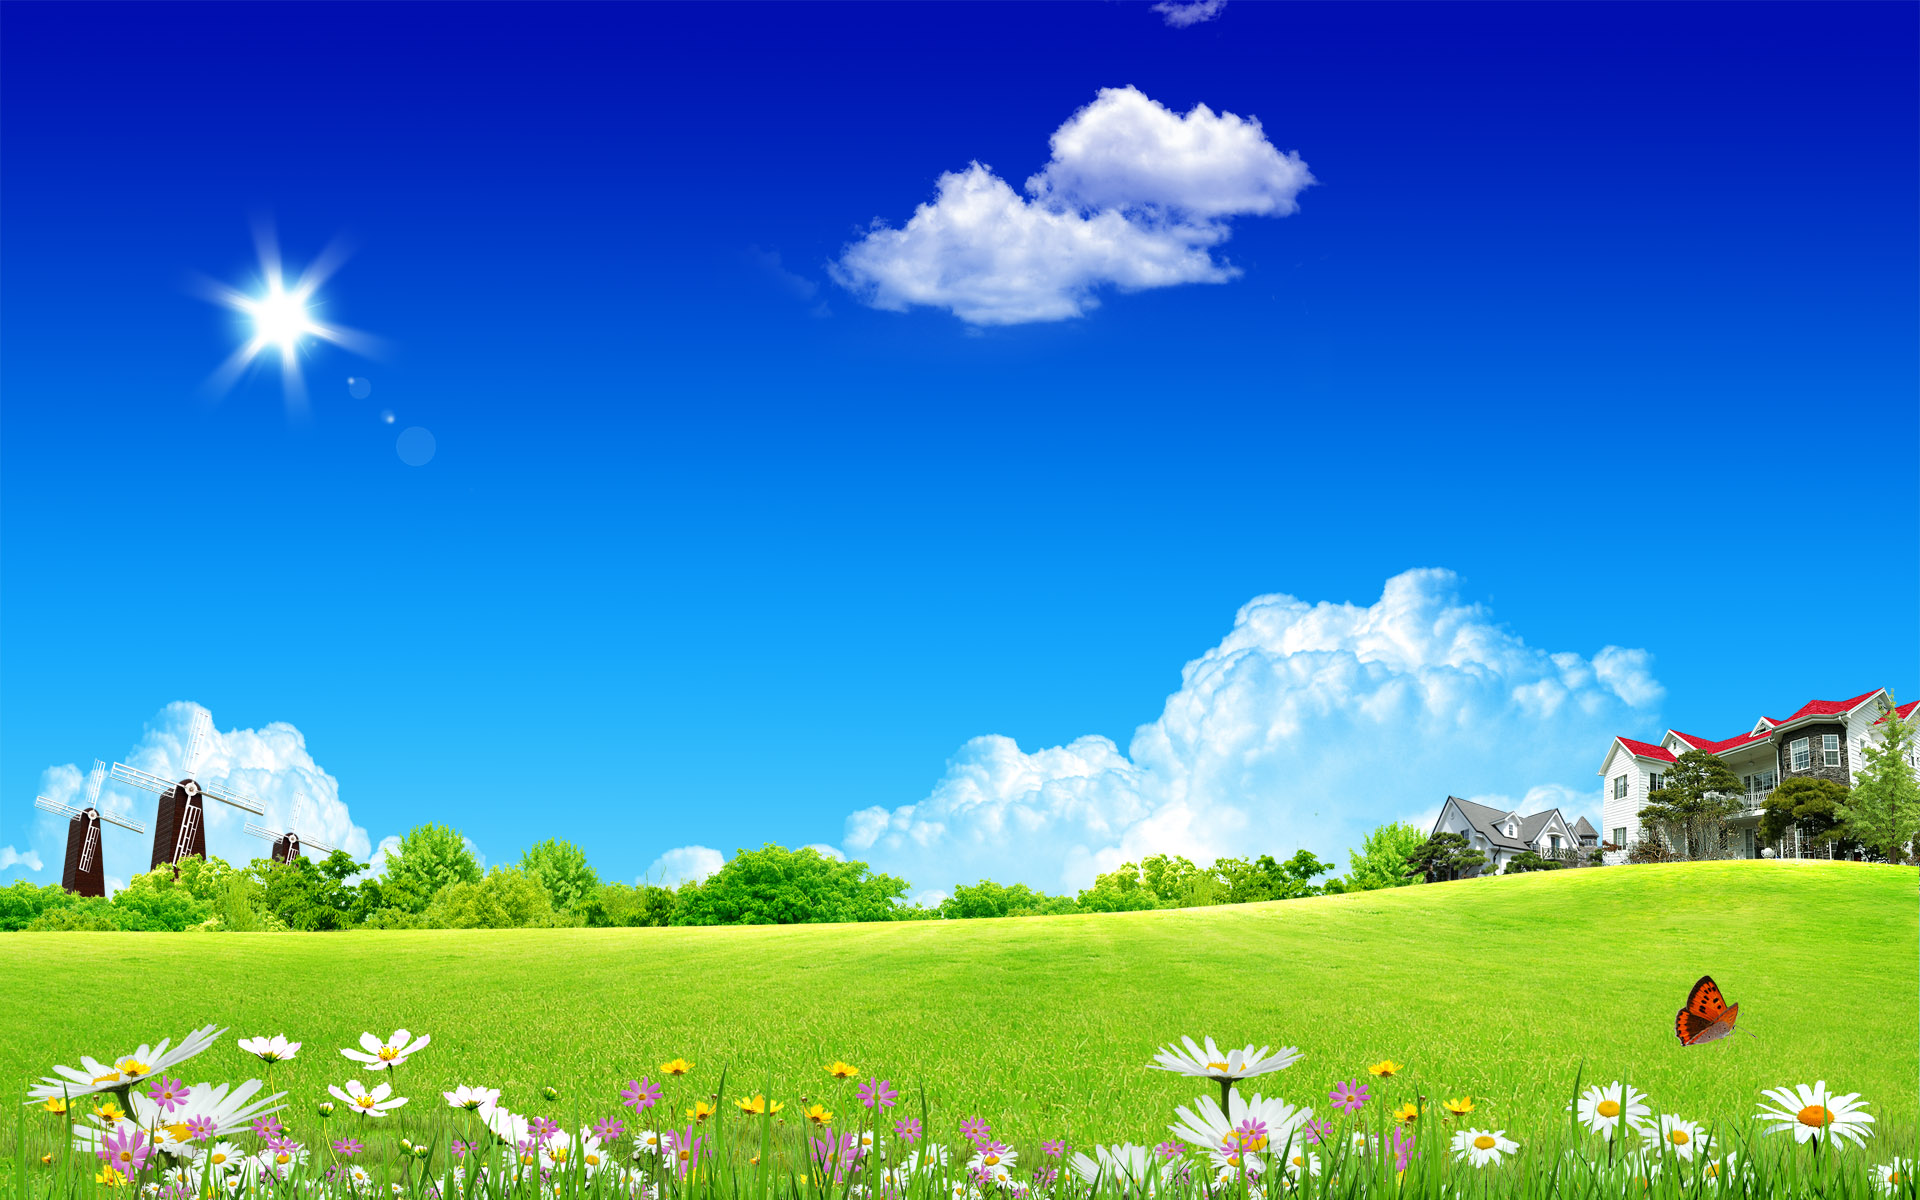 Scenery Wallpaper Includes A Clean Home Sky What An Amazing Scene